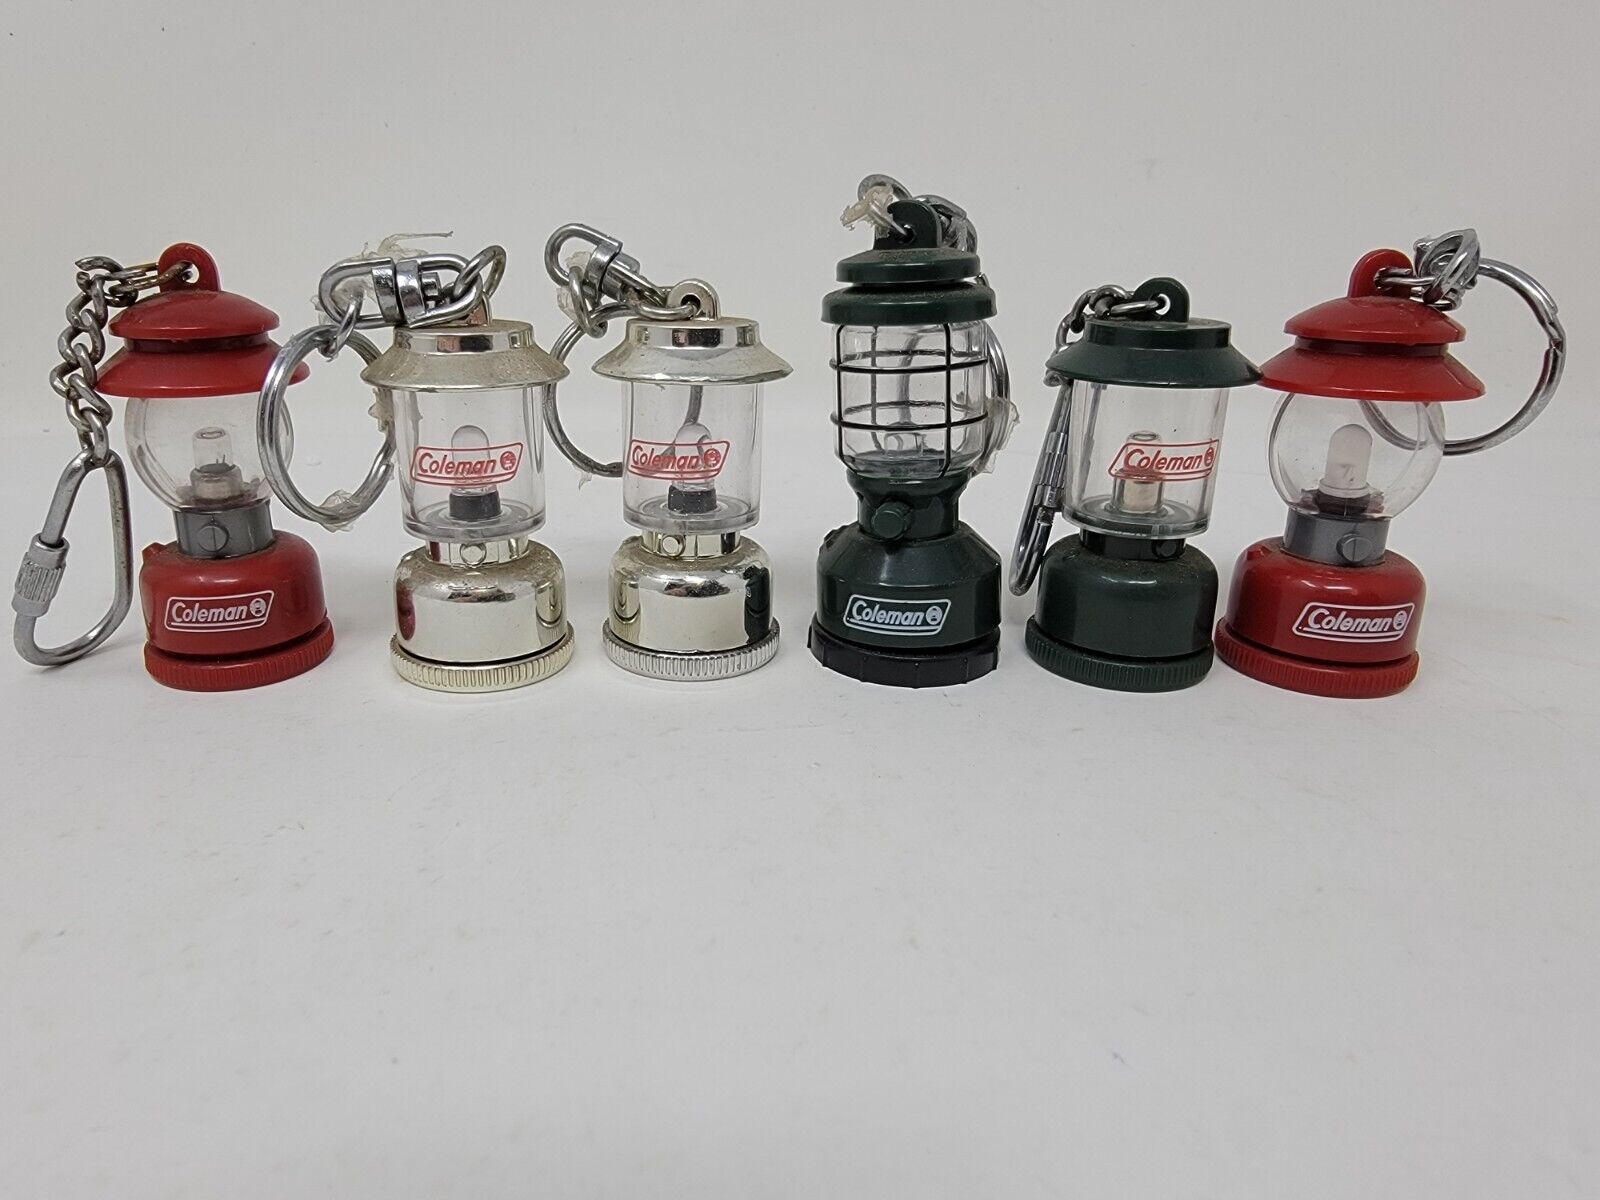 Vintage Coleman Lantern Keychain Collection Lot of 6